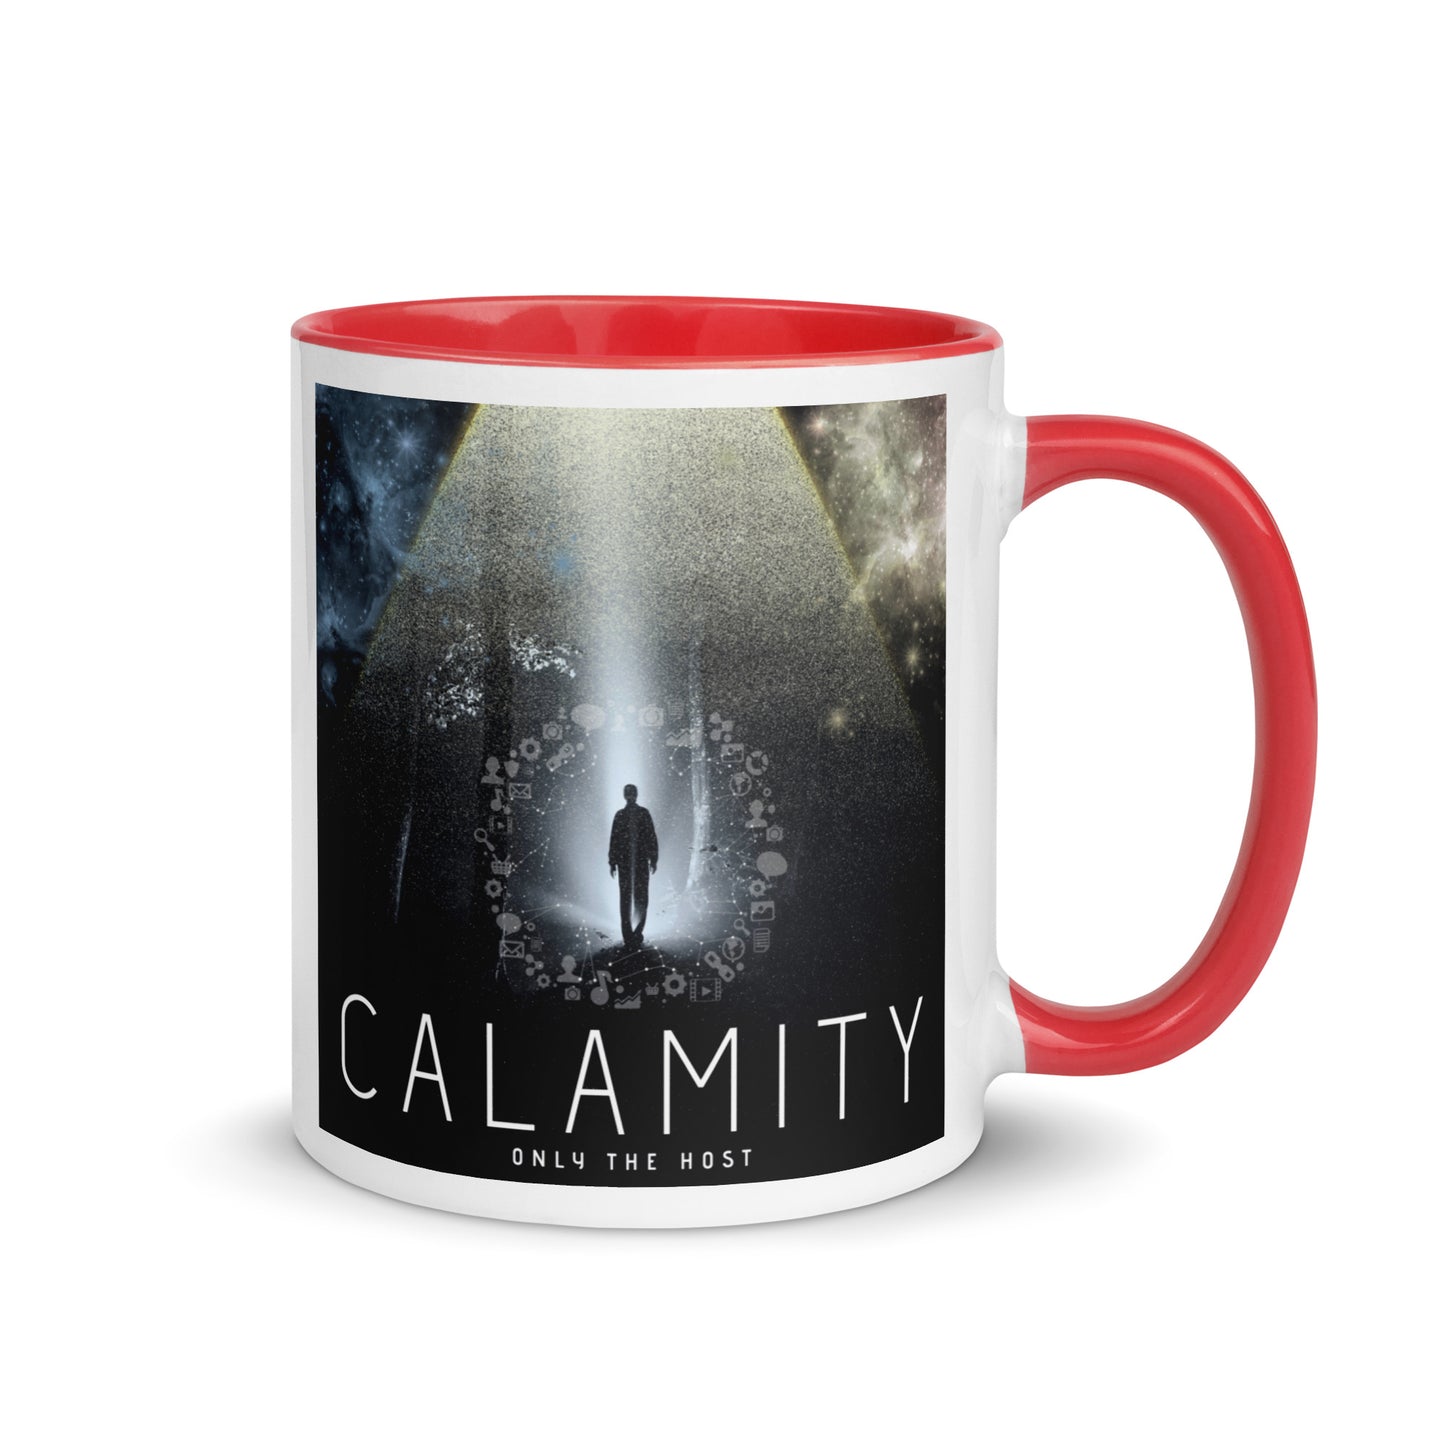 Only The Host - Calamity Mug With Color Inside